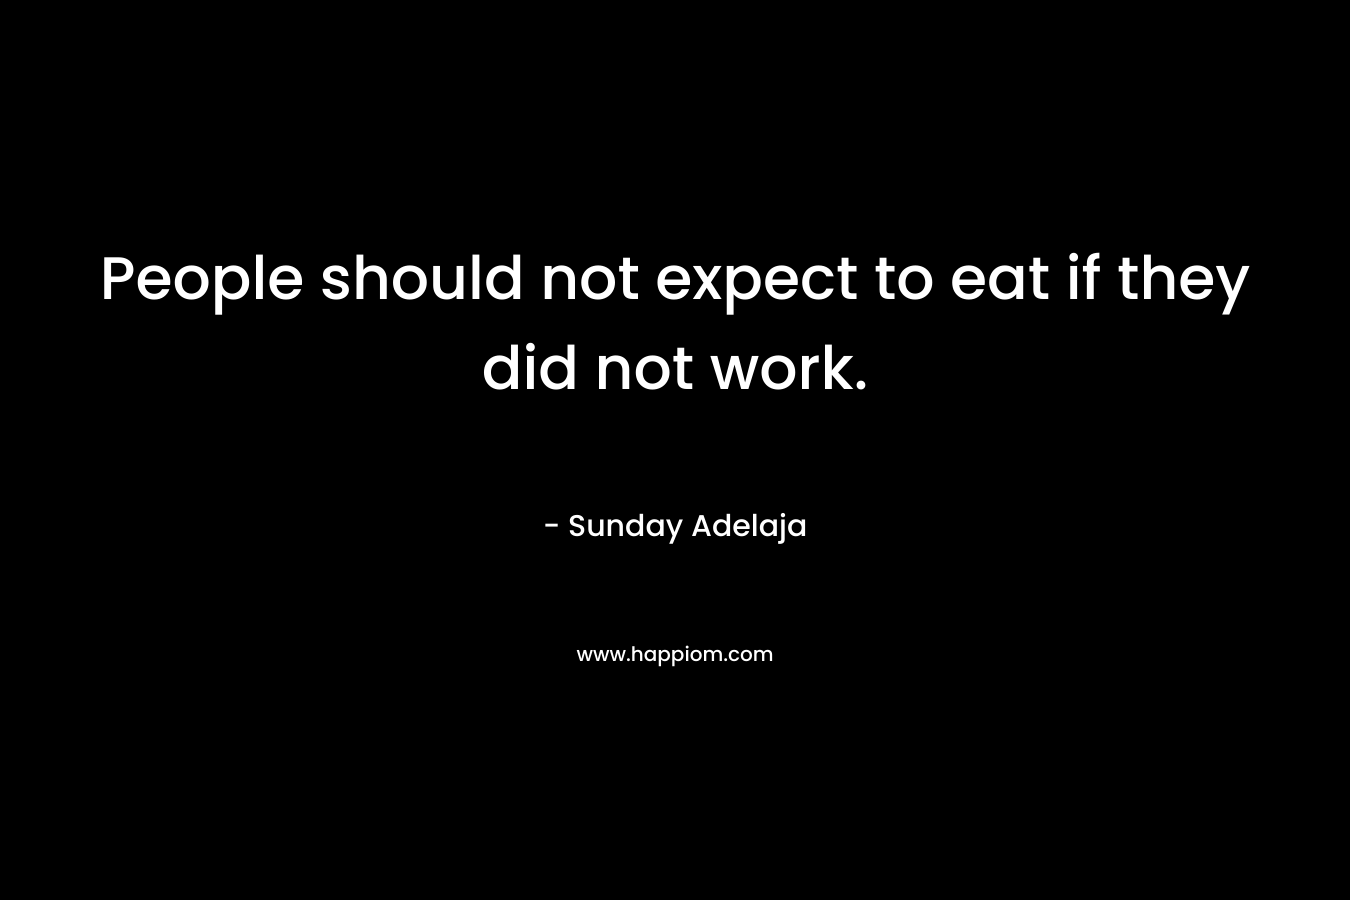 People should not expect to eat if they did not work.